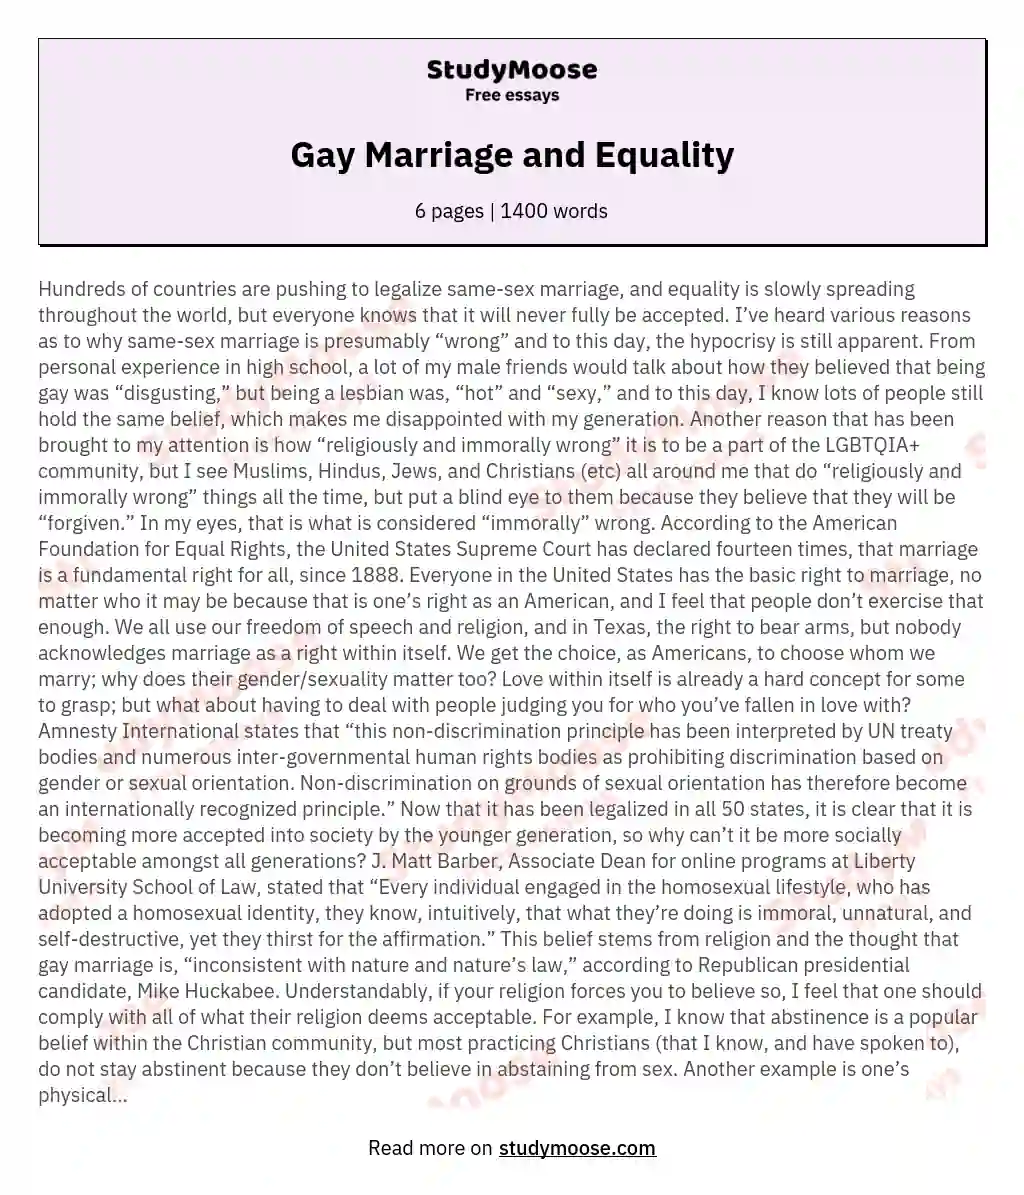 Gay Marriage and Equality essay